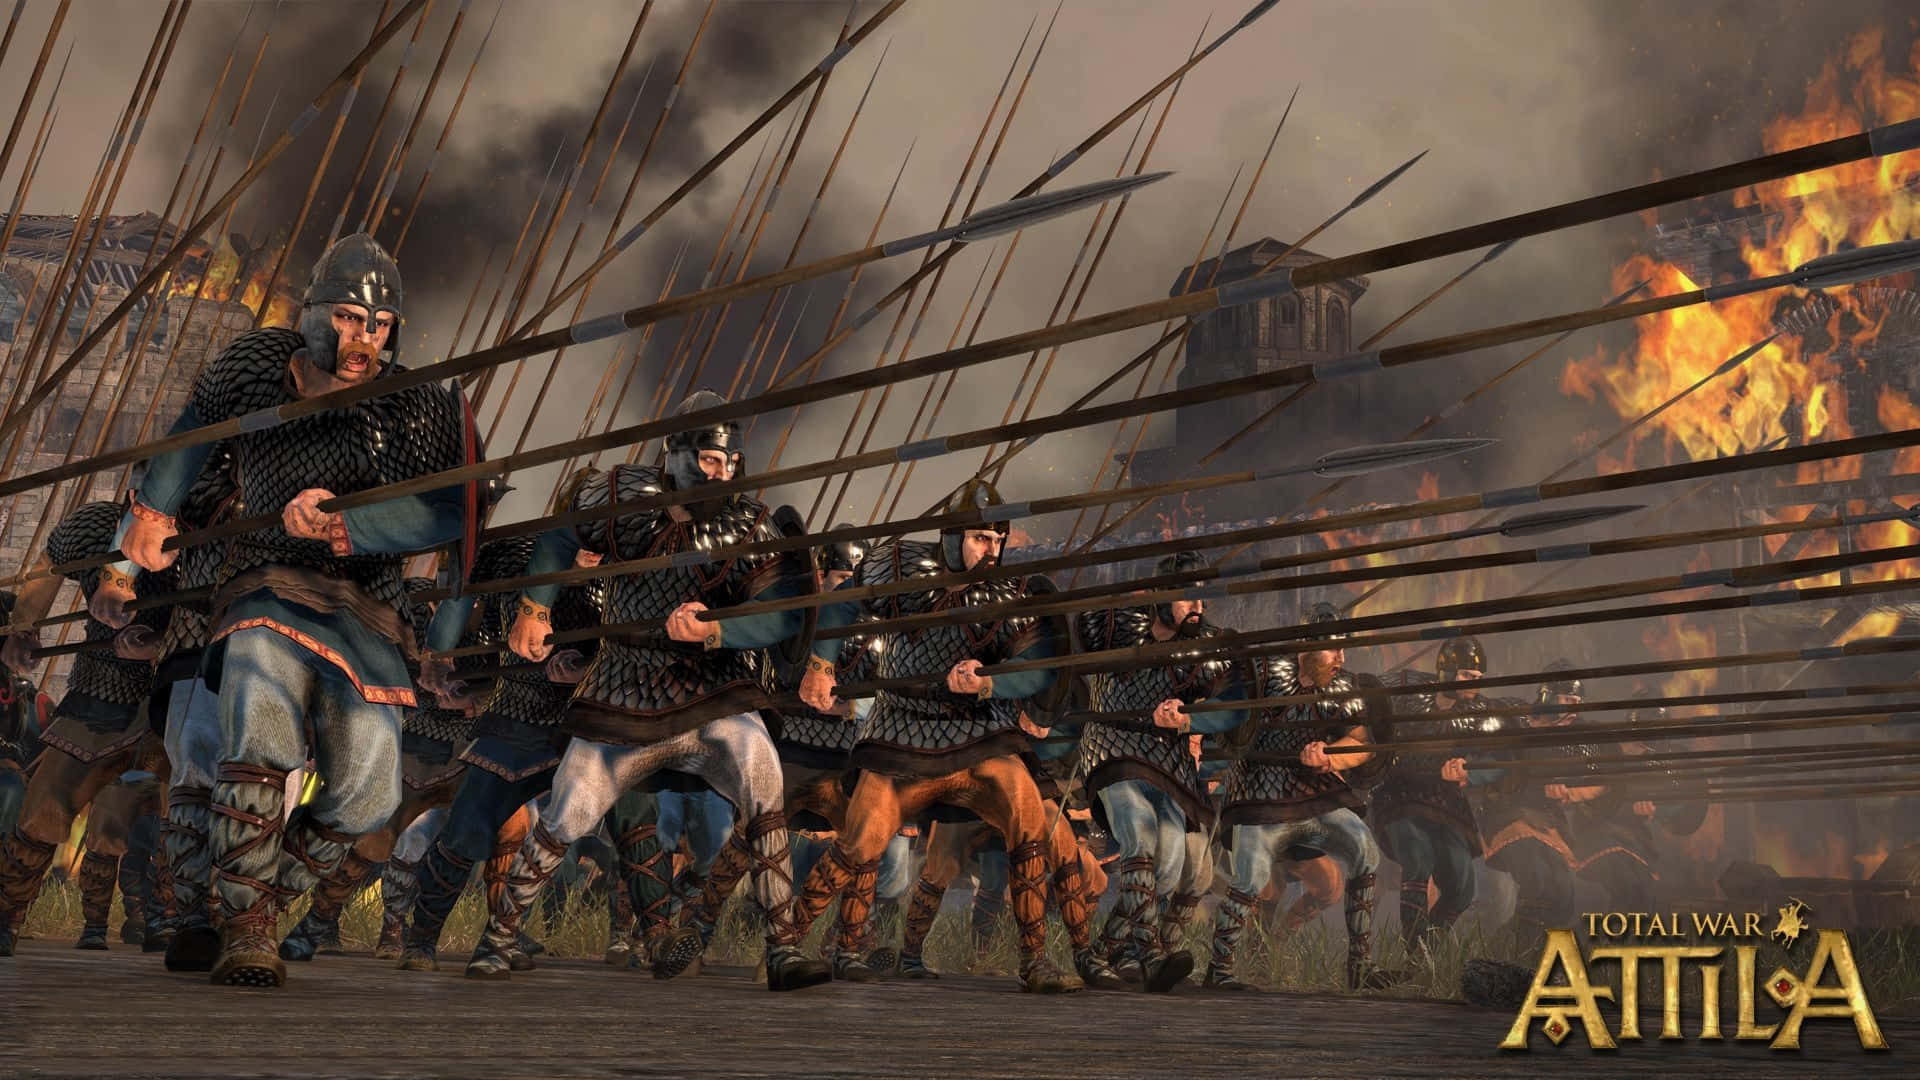 Master the art of war in the awesome game Attila Total War Wallpaper